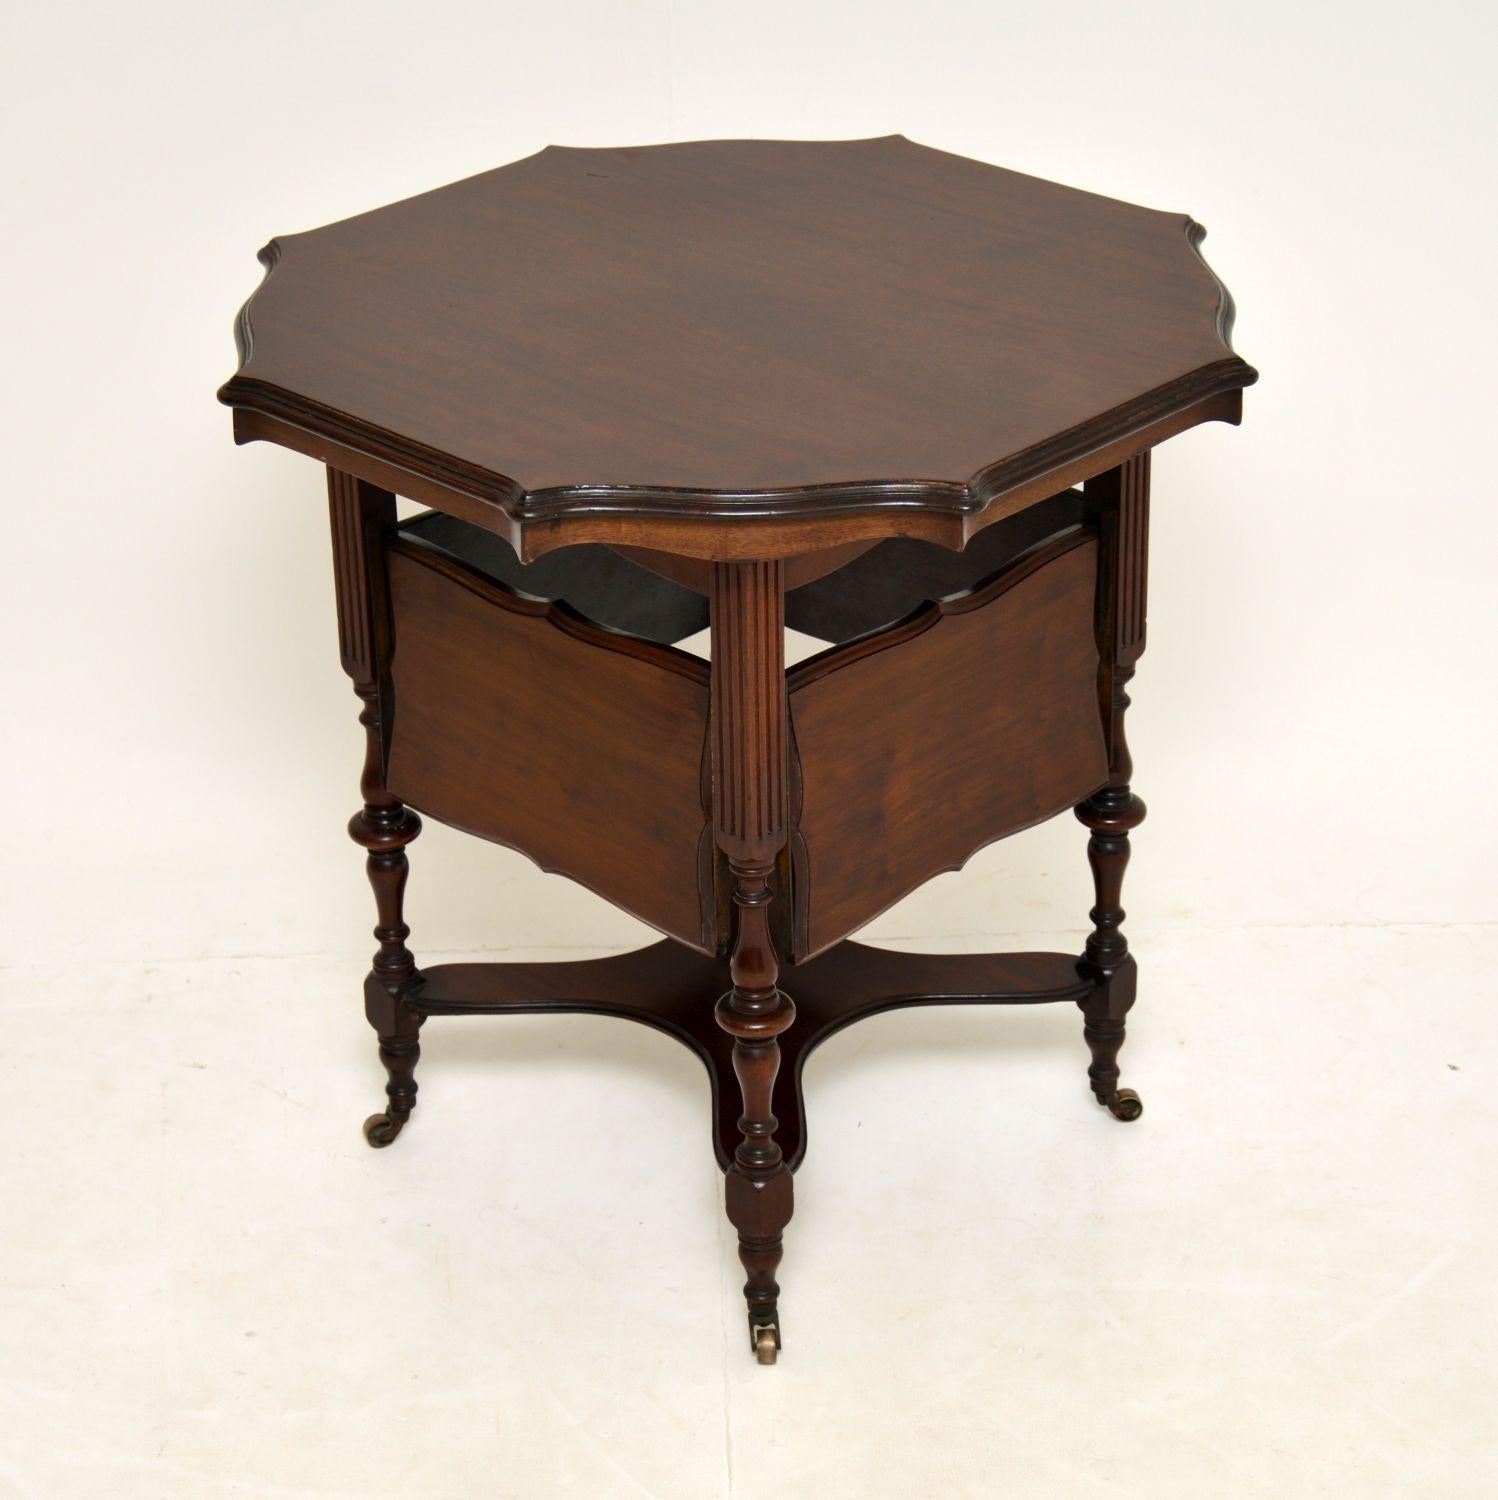 A smart and interesting antique occasional table in mahogany. This dates from around the 1890-1900 period.

It is of lovely quality, with a beautifully shaped octagonal top. It sits on turned and fluted legs, which terminate in original brass